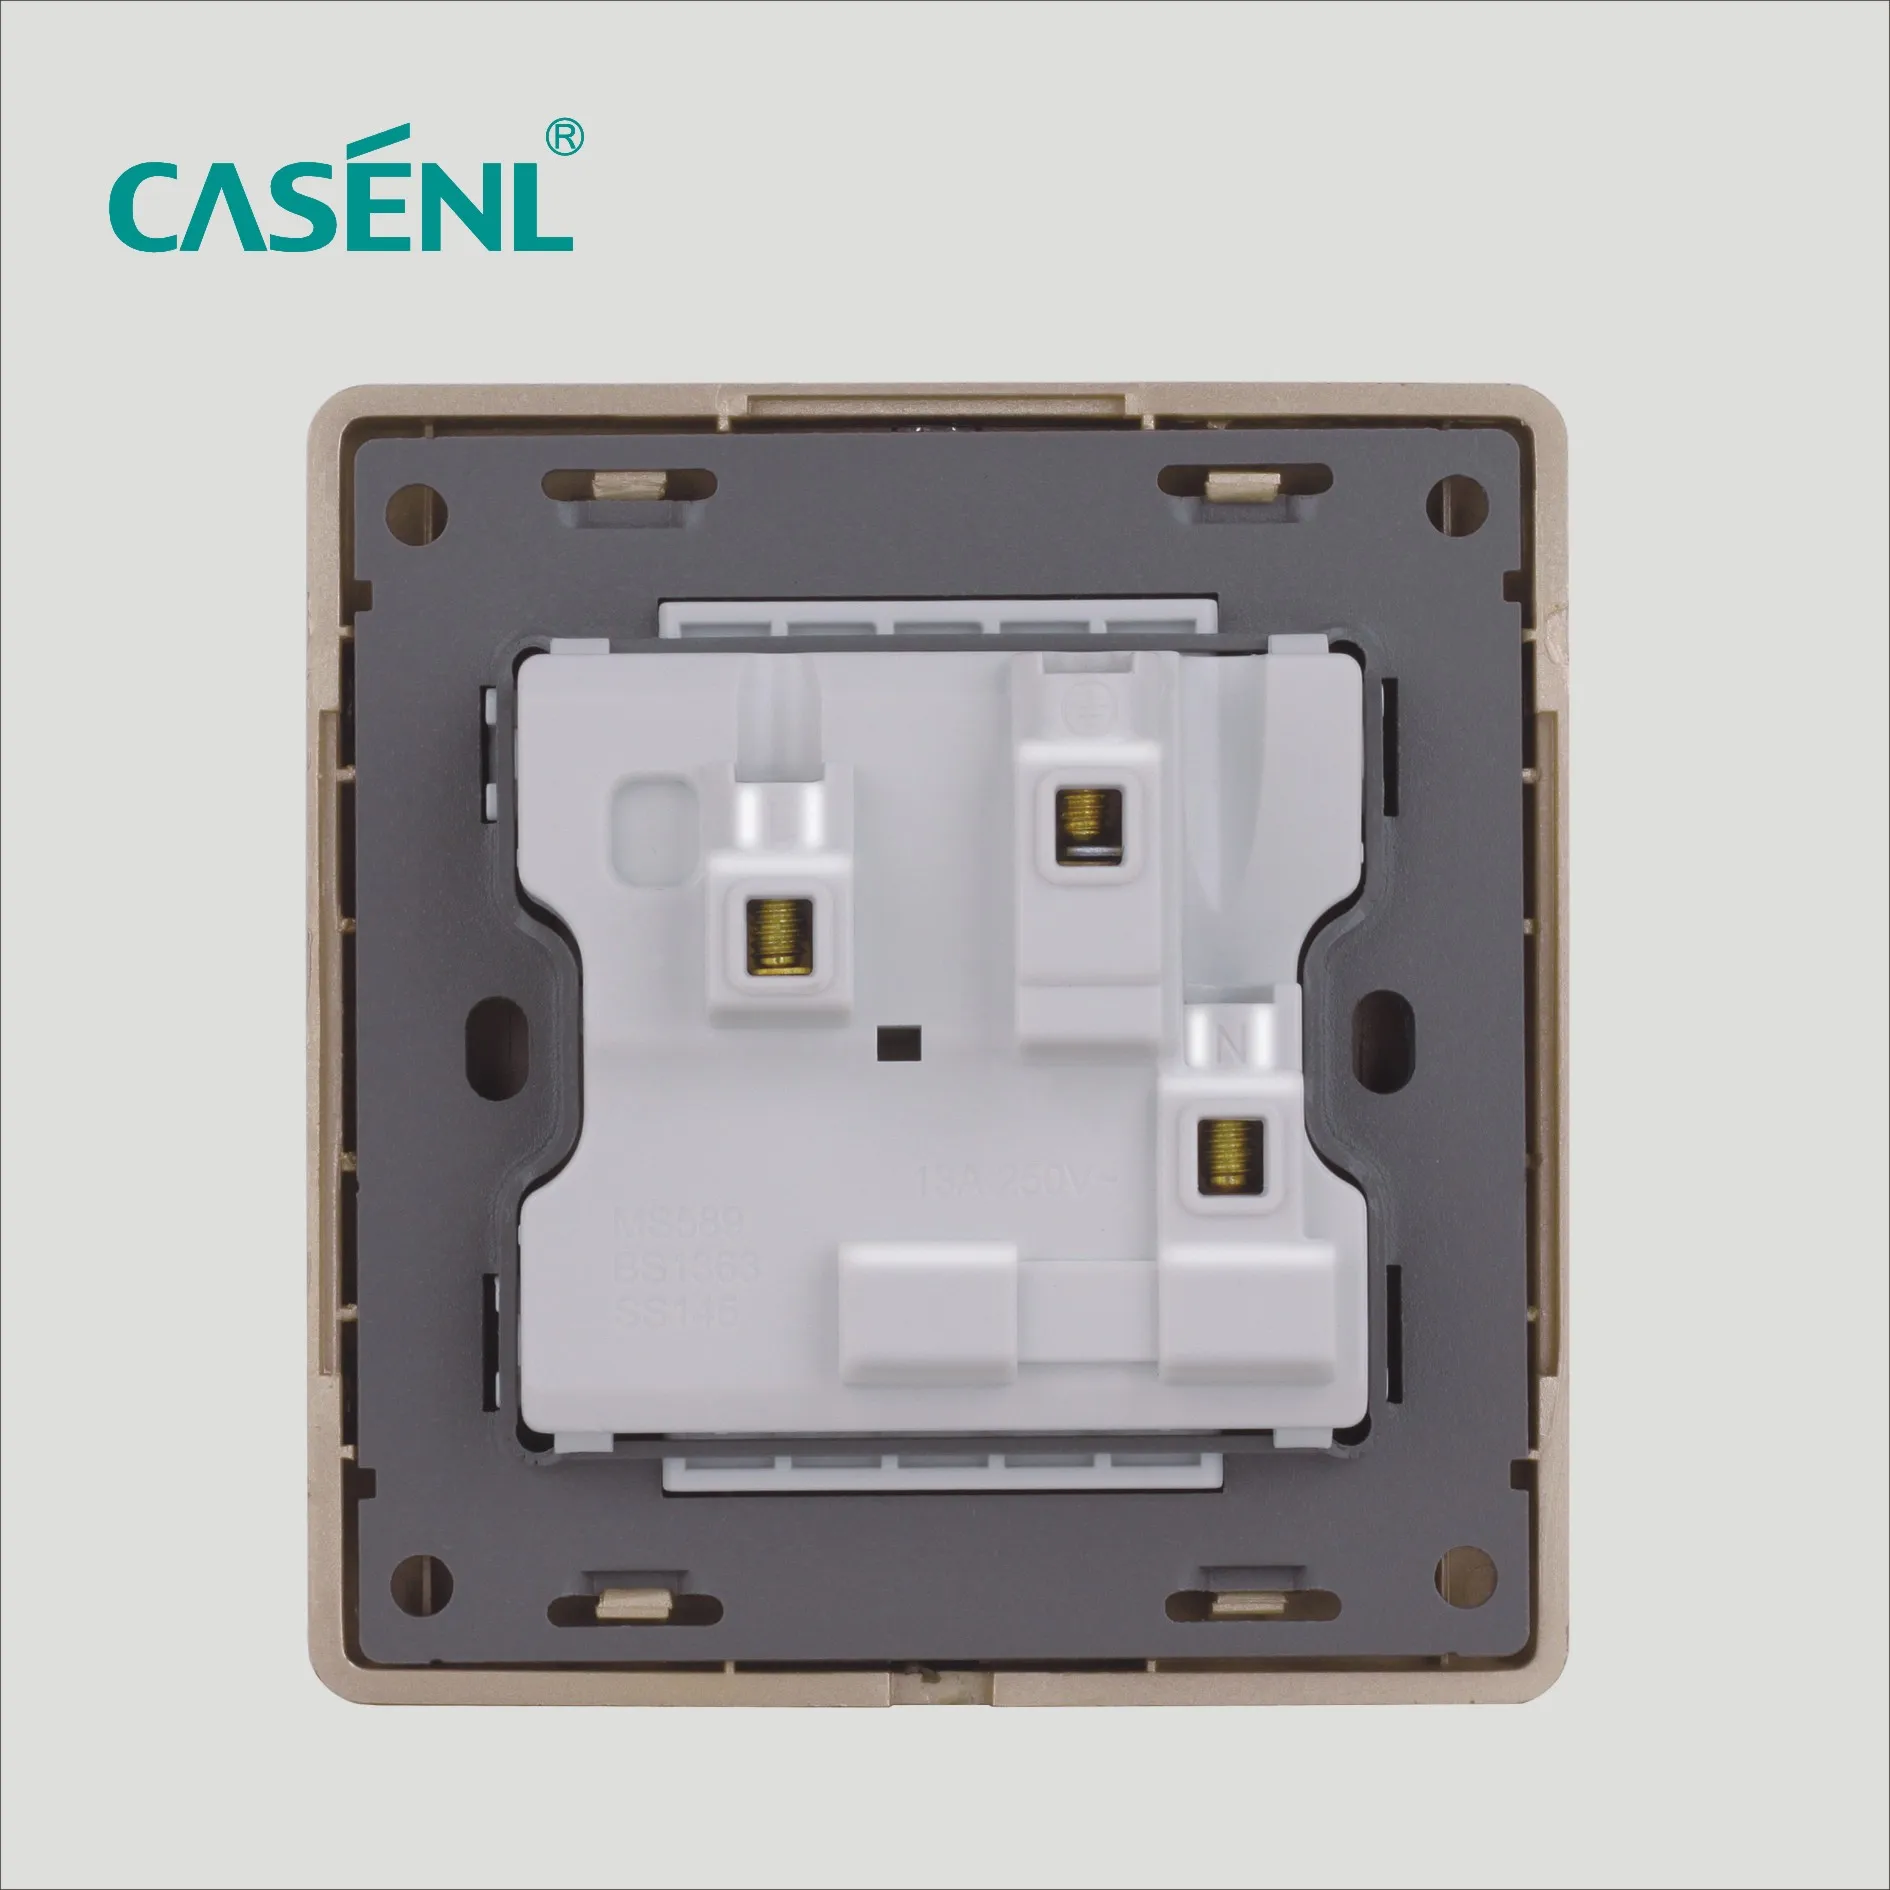 A12 series stainless steel material 13A wall switch socket